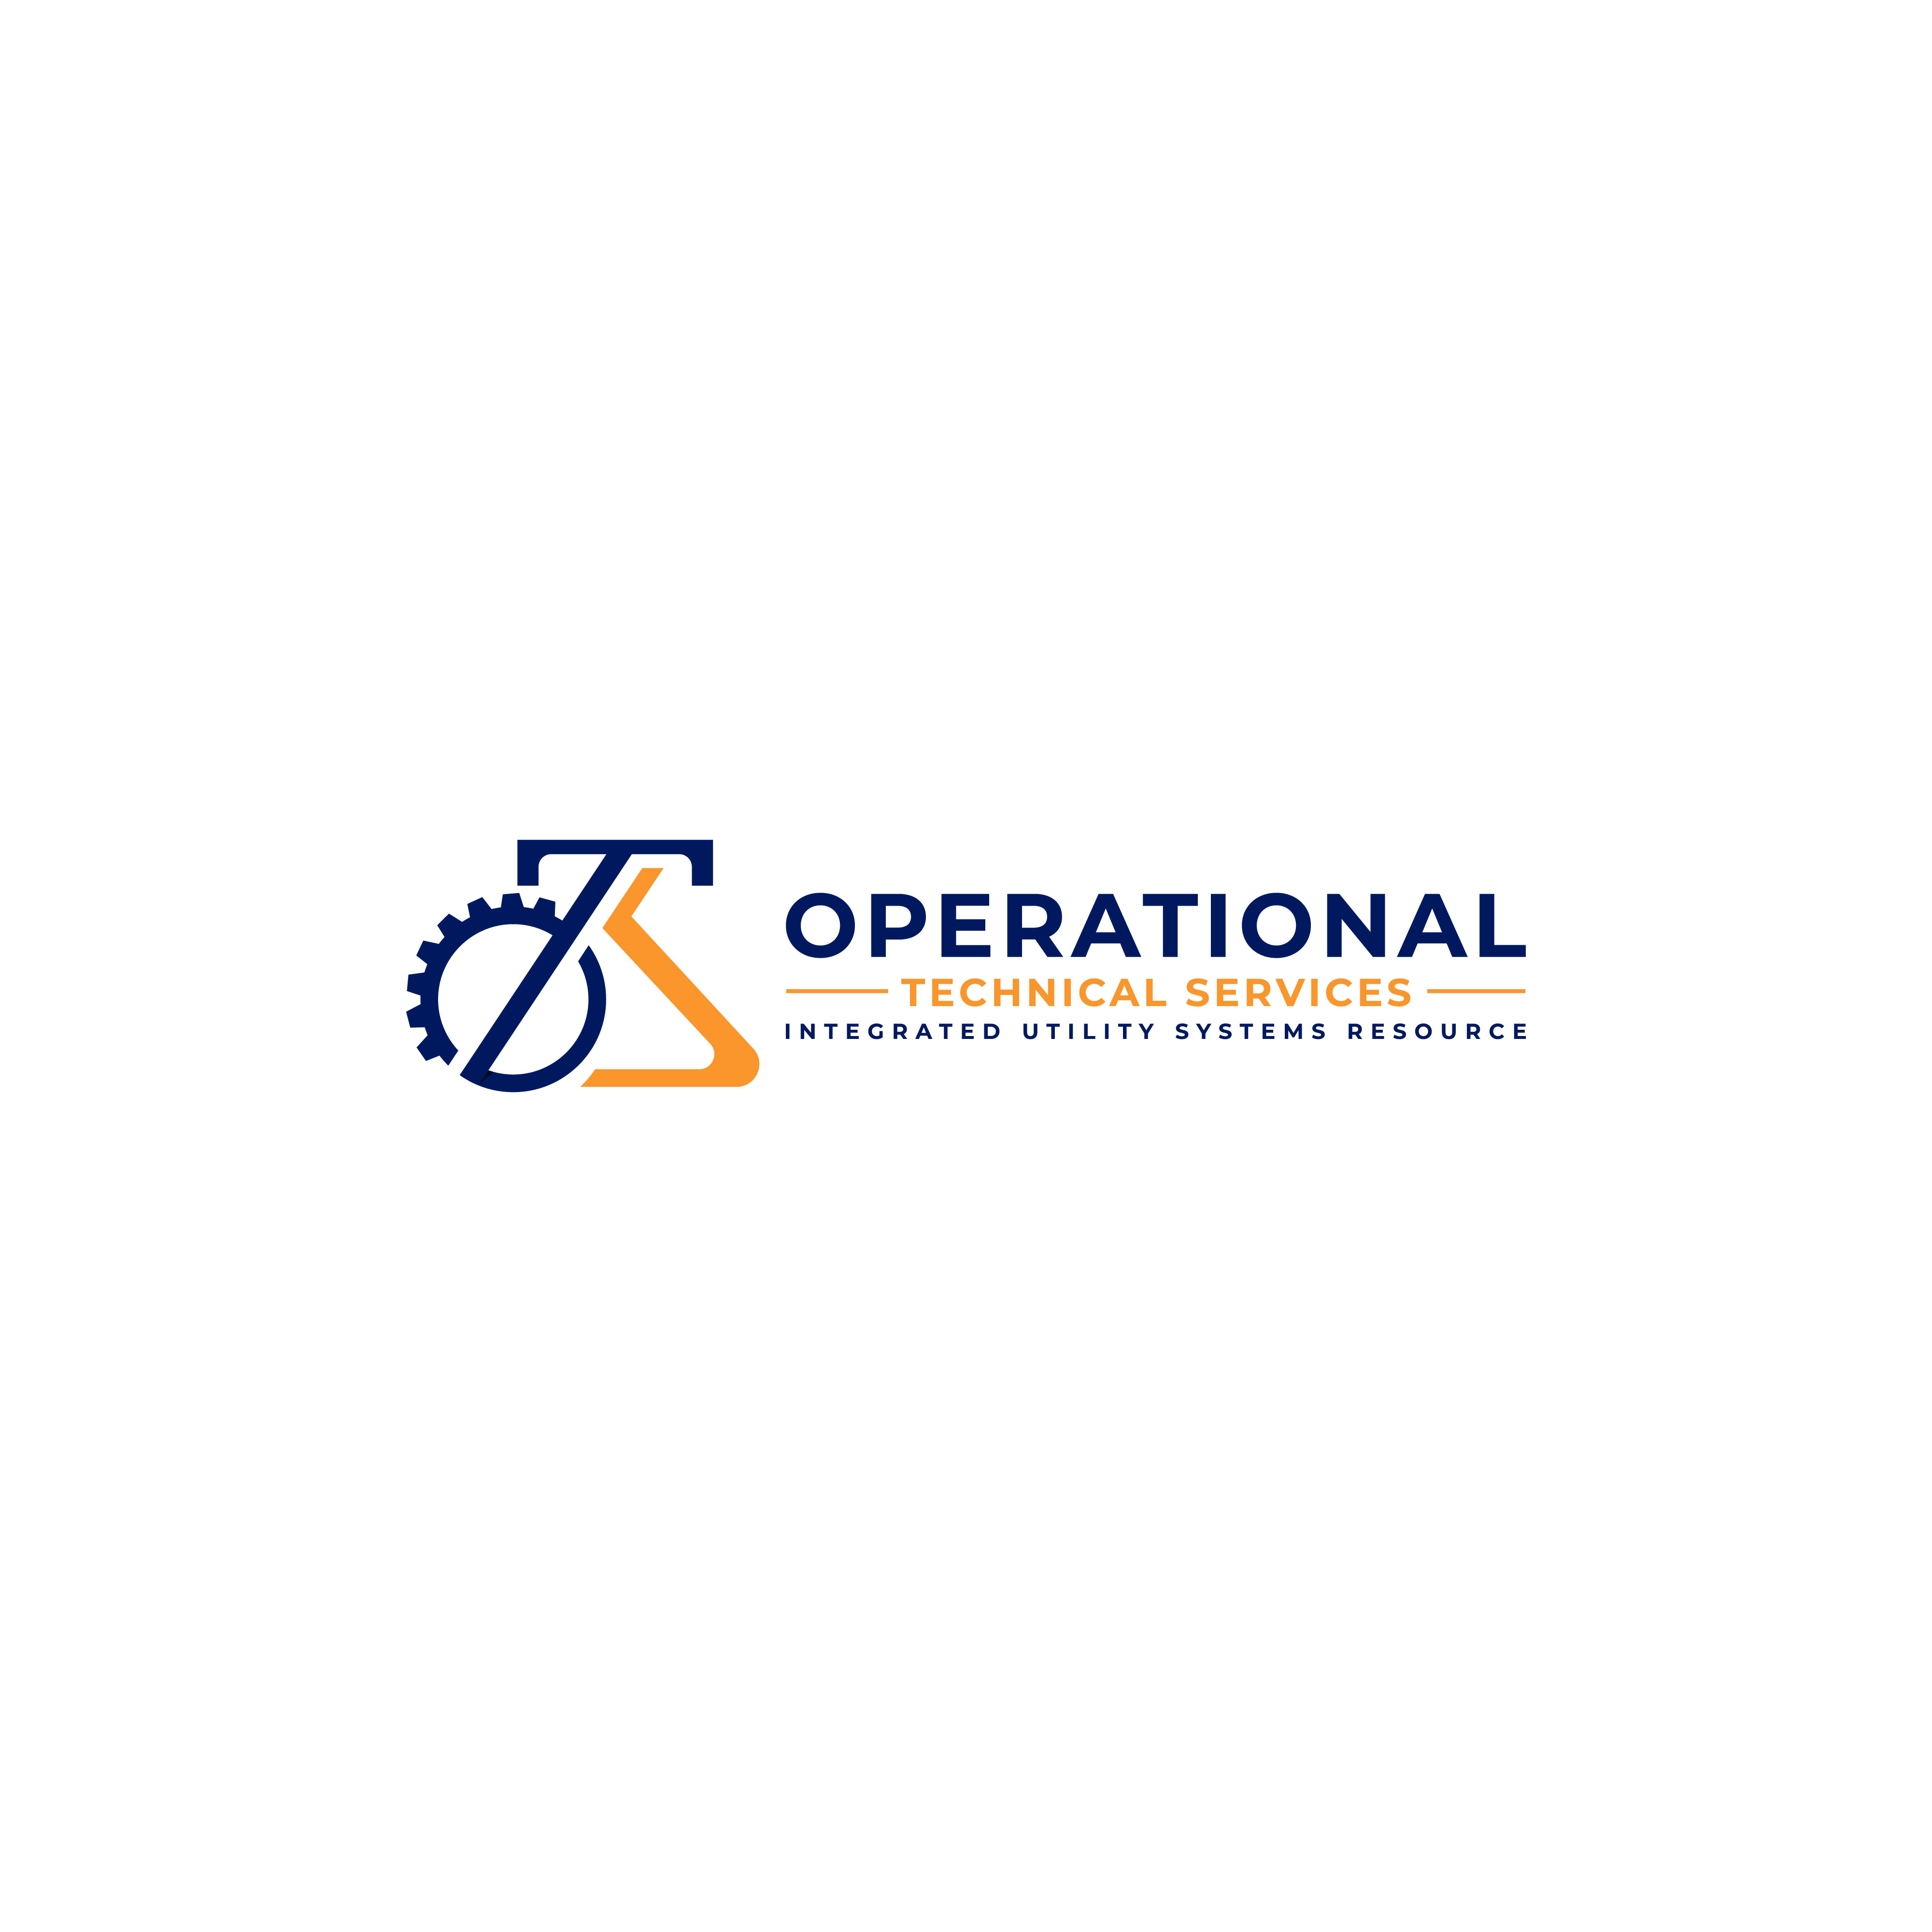 Operational Technical Services LLC